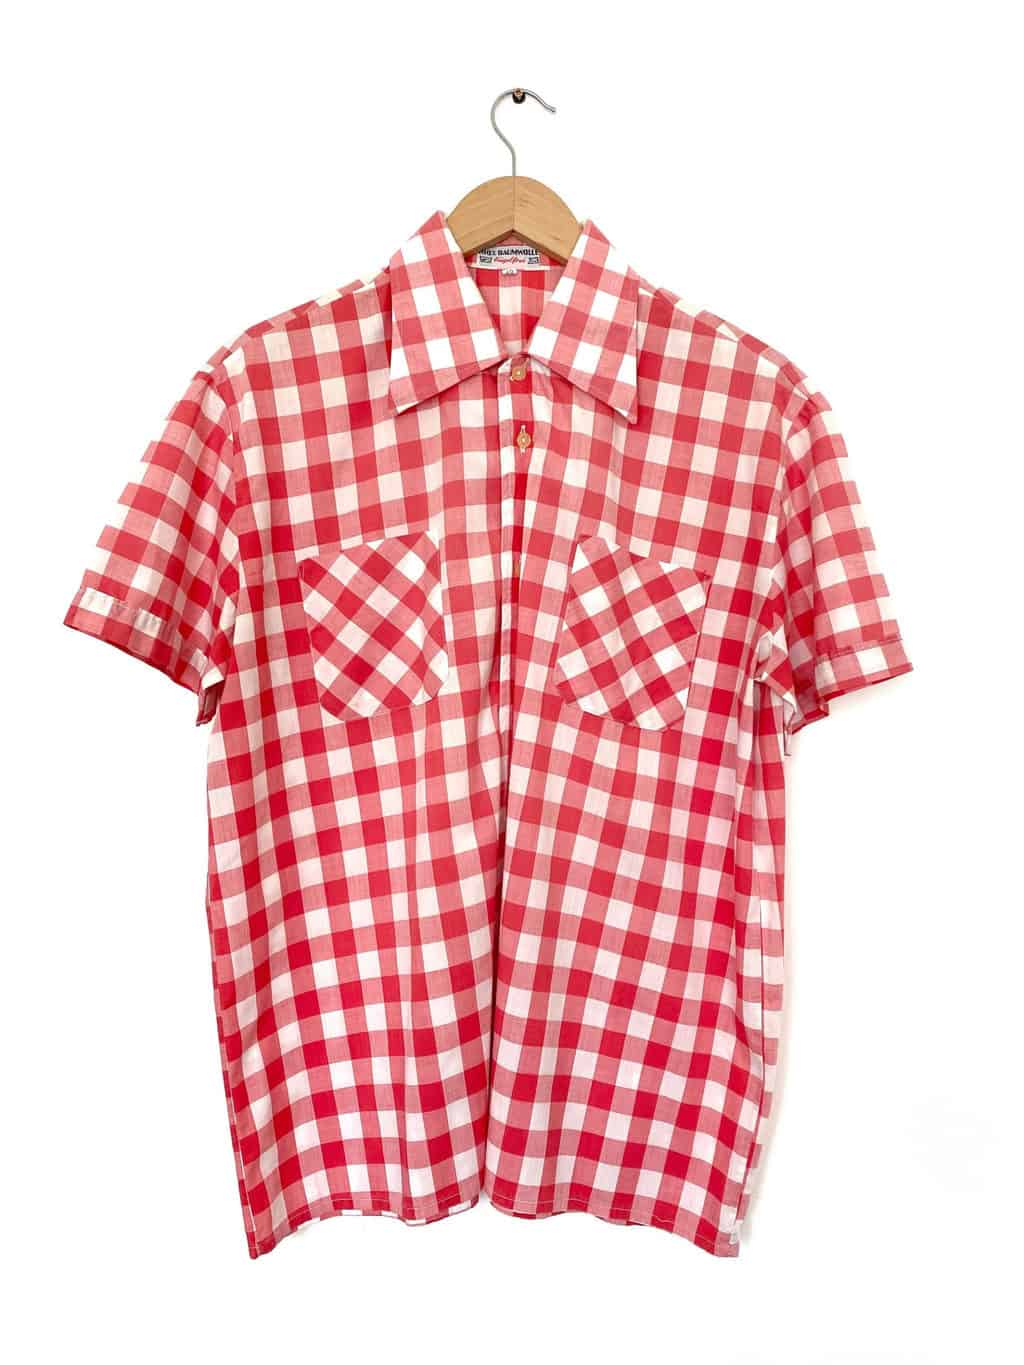 70s Red & White Check Shirt with Big Pointed Collar - L / XL - St Cyr  Vintage